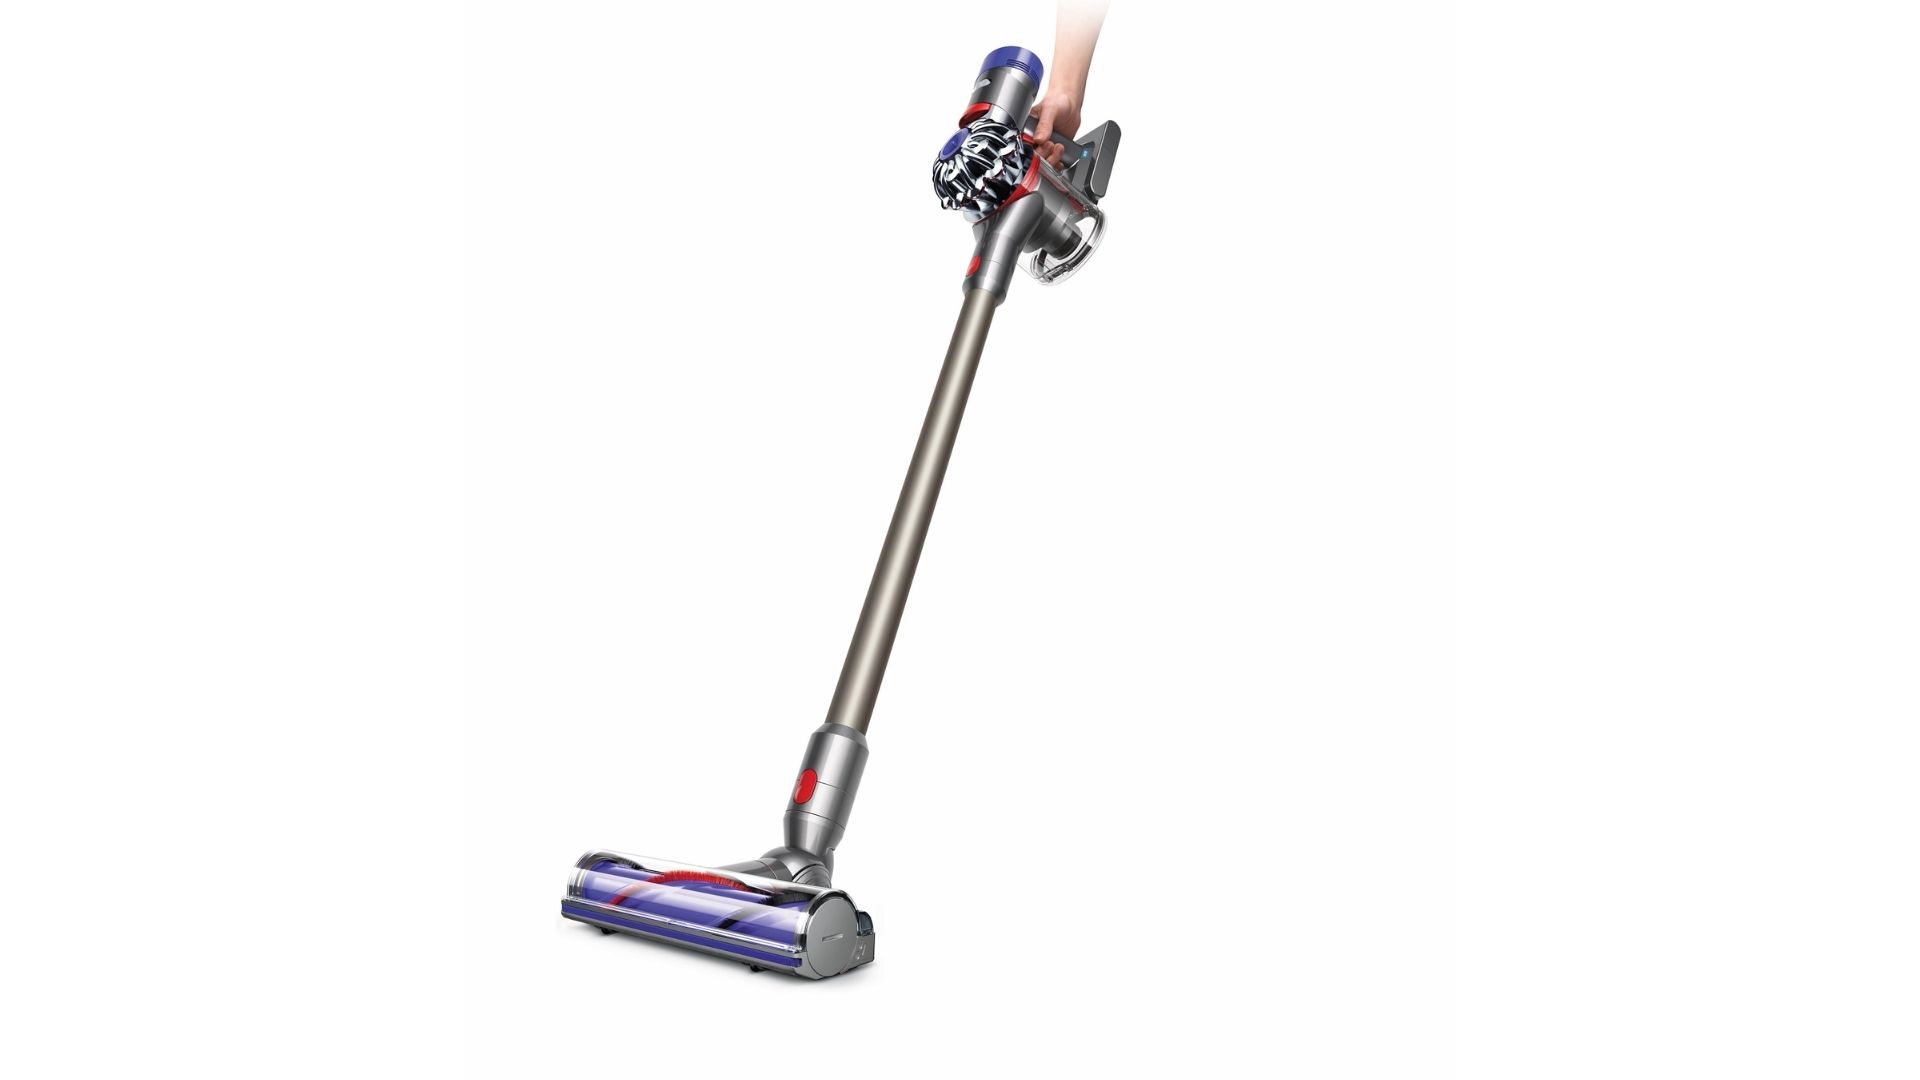 LIVE Dyson Black Friday offers: finest locations to purchase, low costs